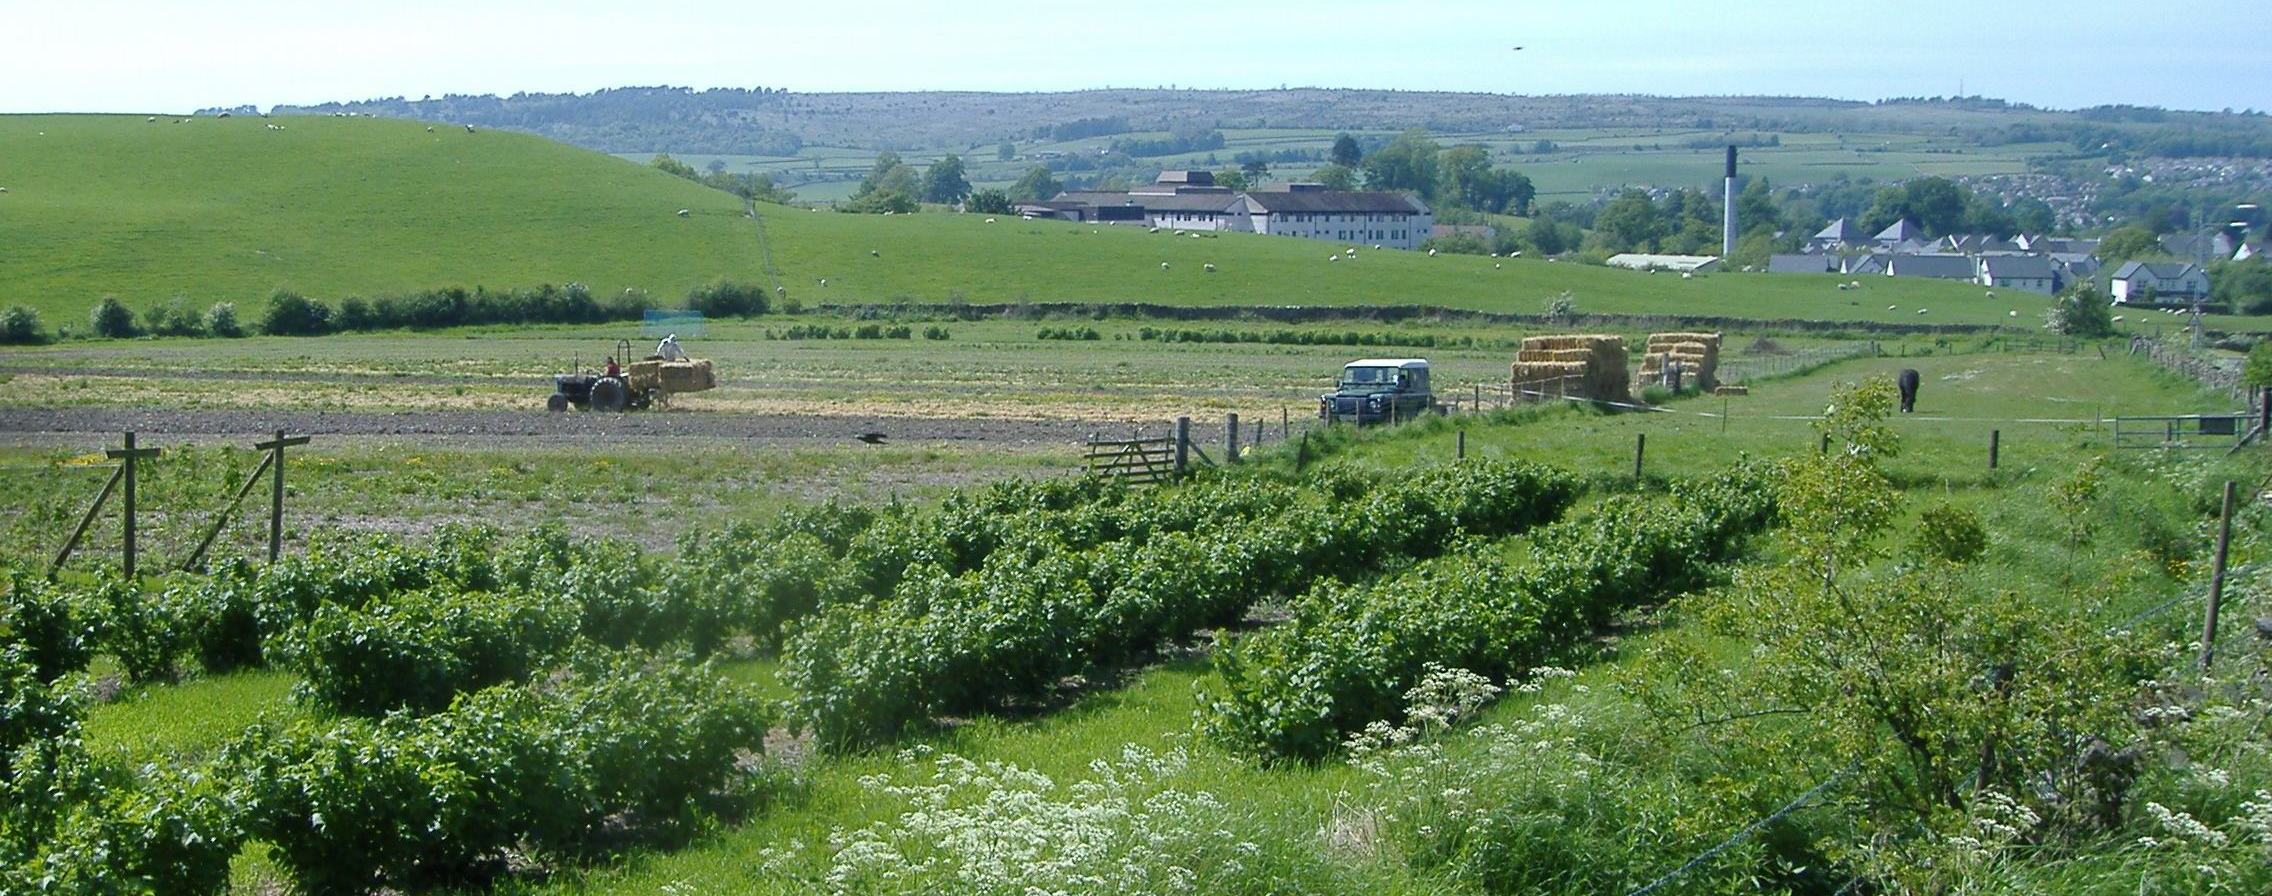 View of Kendal's Strawberry field